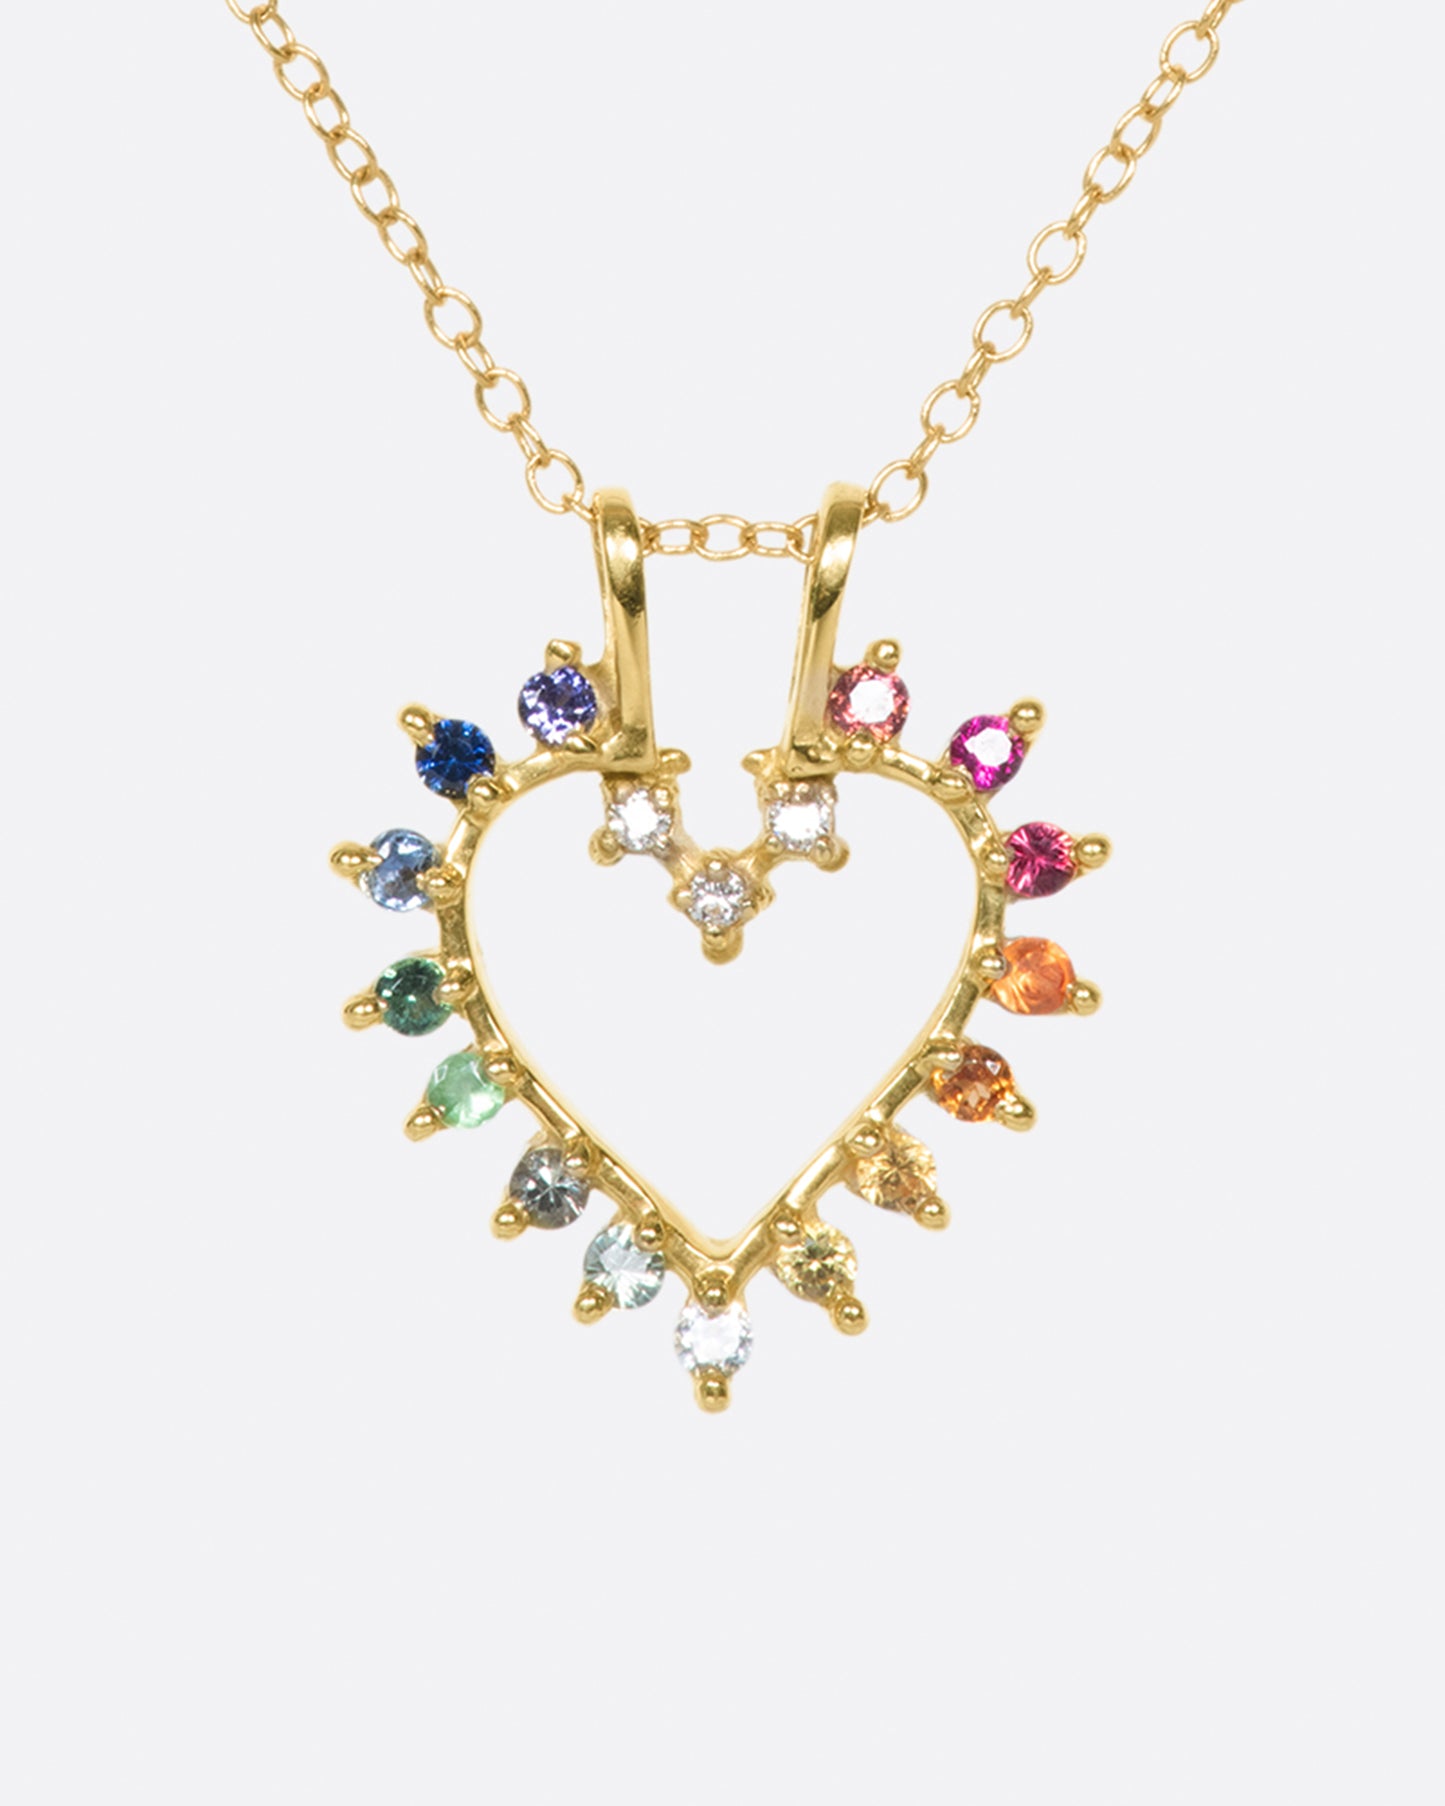 A vintage-inspired heart pendant necklace lined with rainbow sapphires and diamonds.